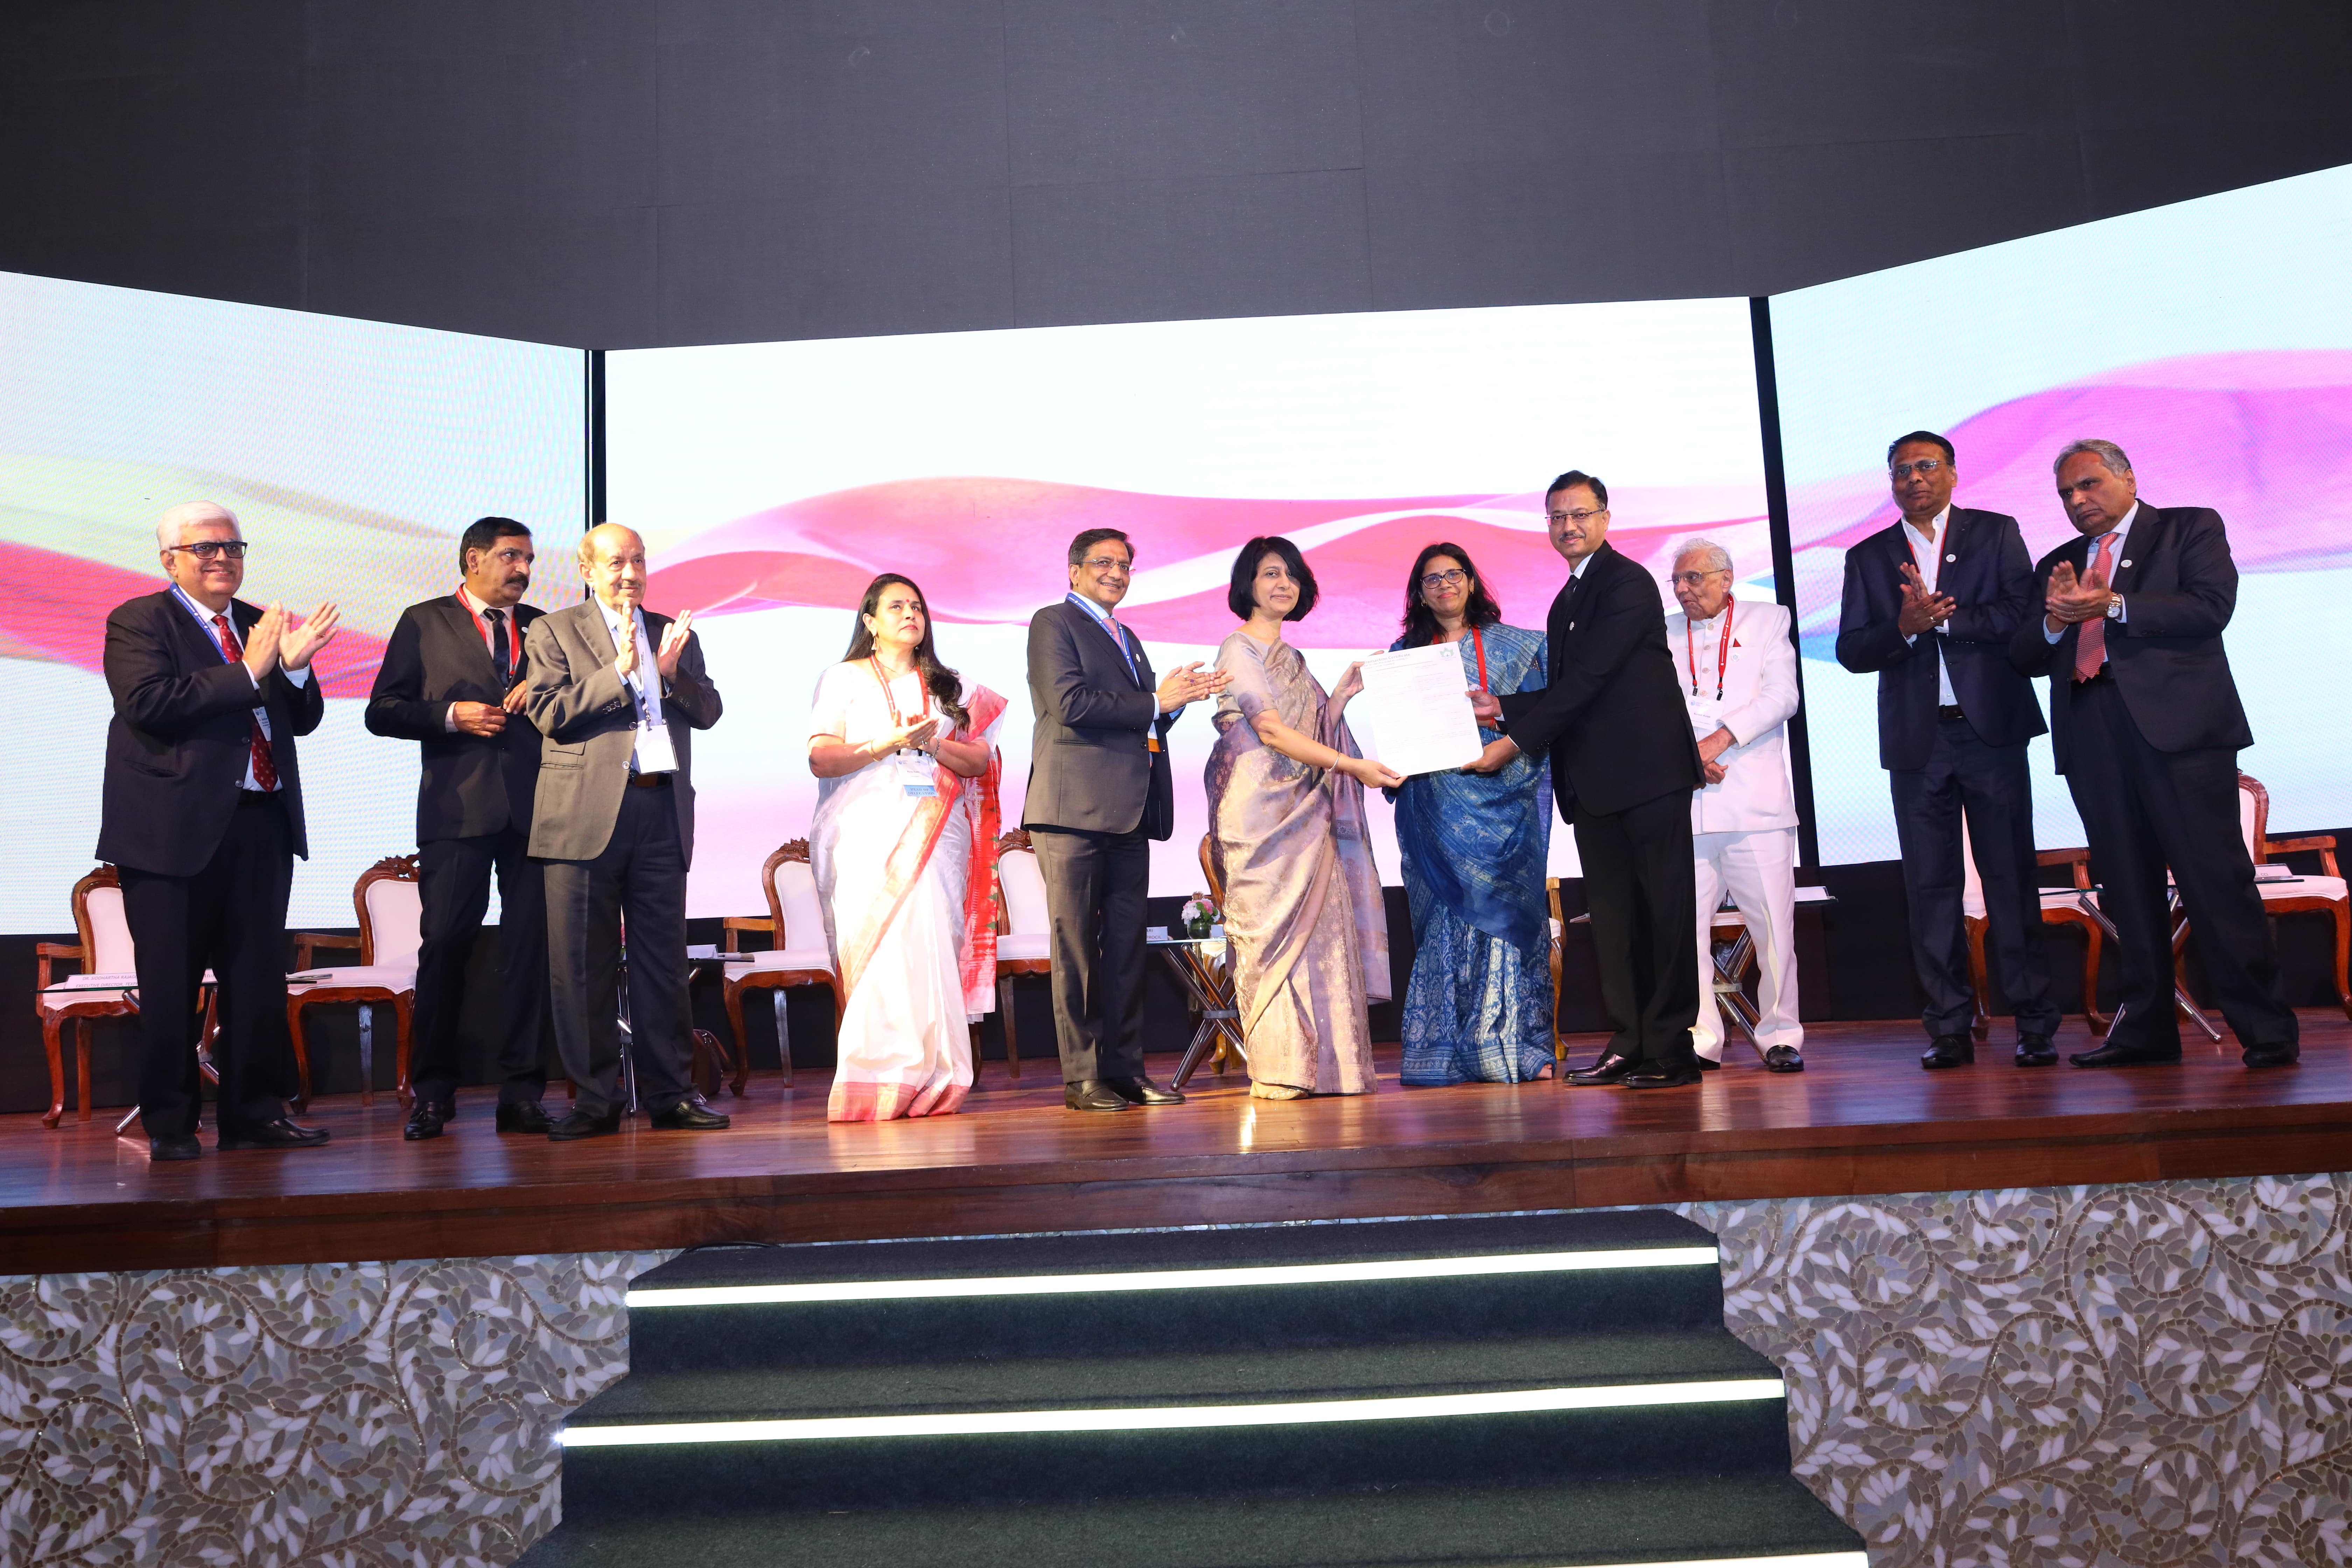 Smt. Rachna Shah, Secretary, Ministry of Textiles presented the first Transaction Certificate to Shri Lalit Kumar Gupta, CMD, CCI at the evening session of Kasturi Cotton Bharat at the 81st Plenary Meeting of the (ICAC) held in Mumbai